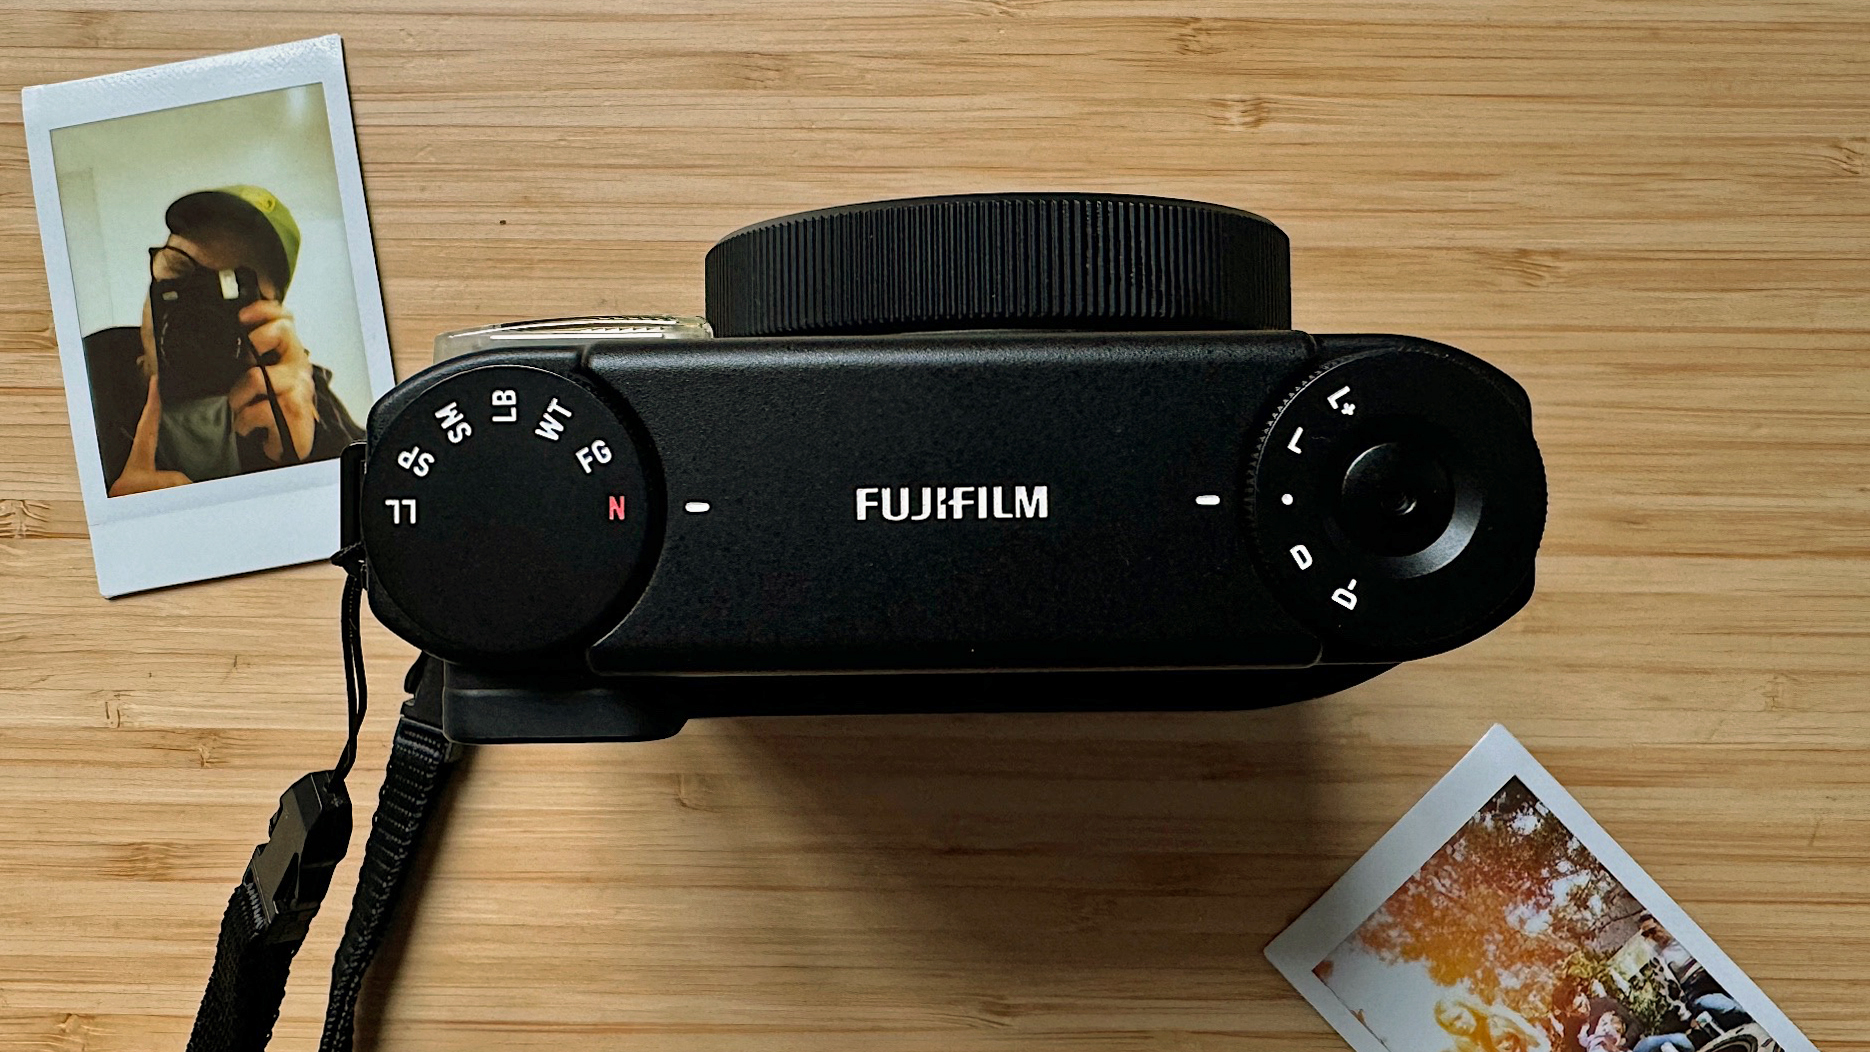 The Instax mini 99 could pass for a real Fujifilm camera